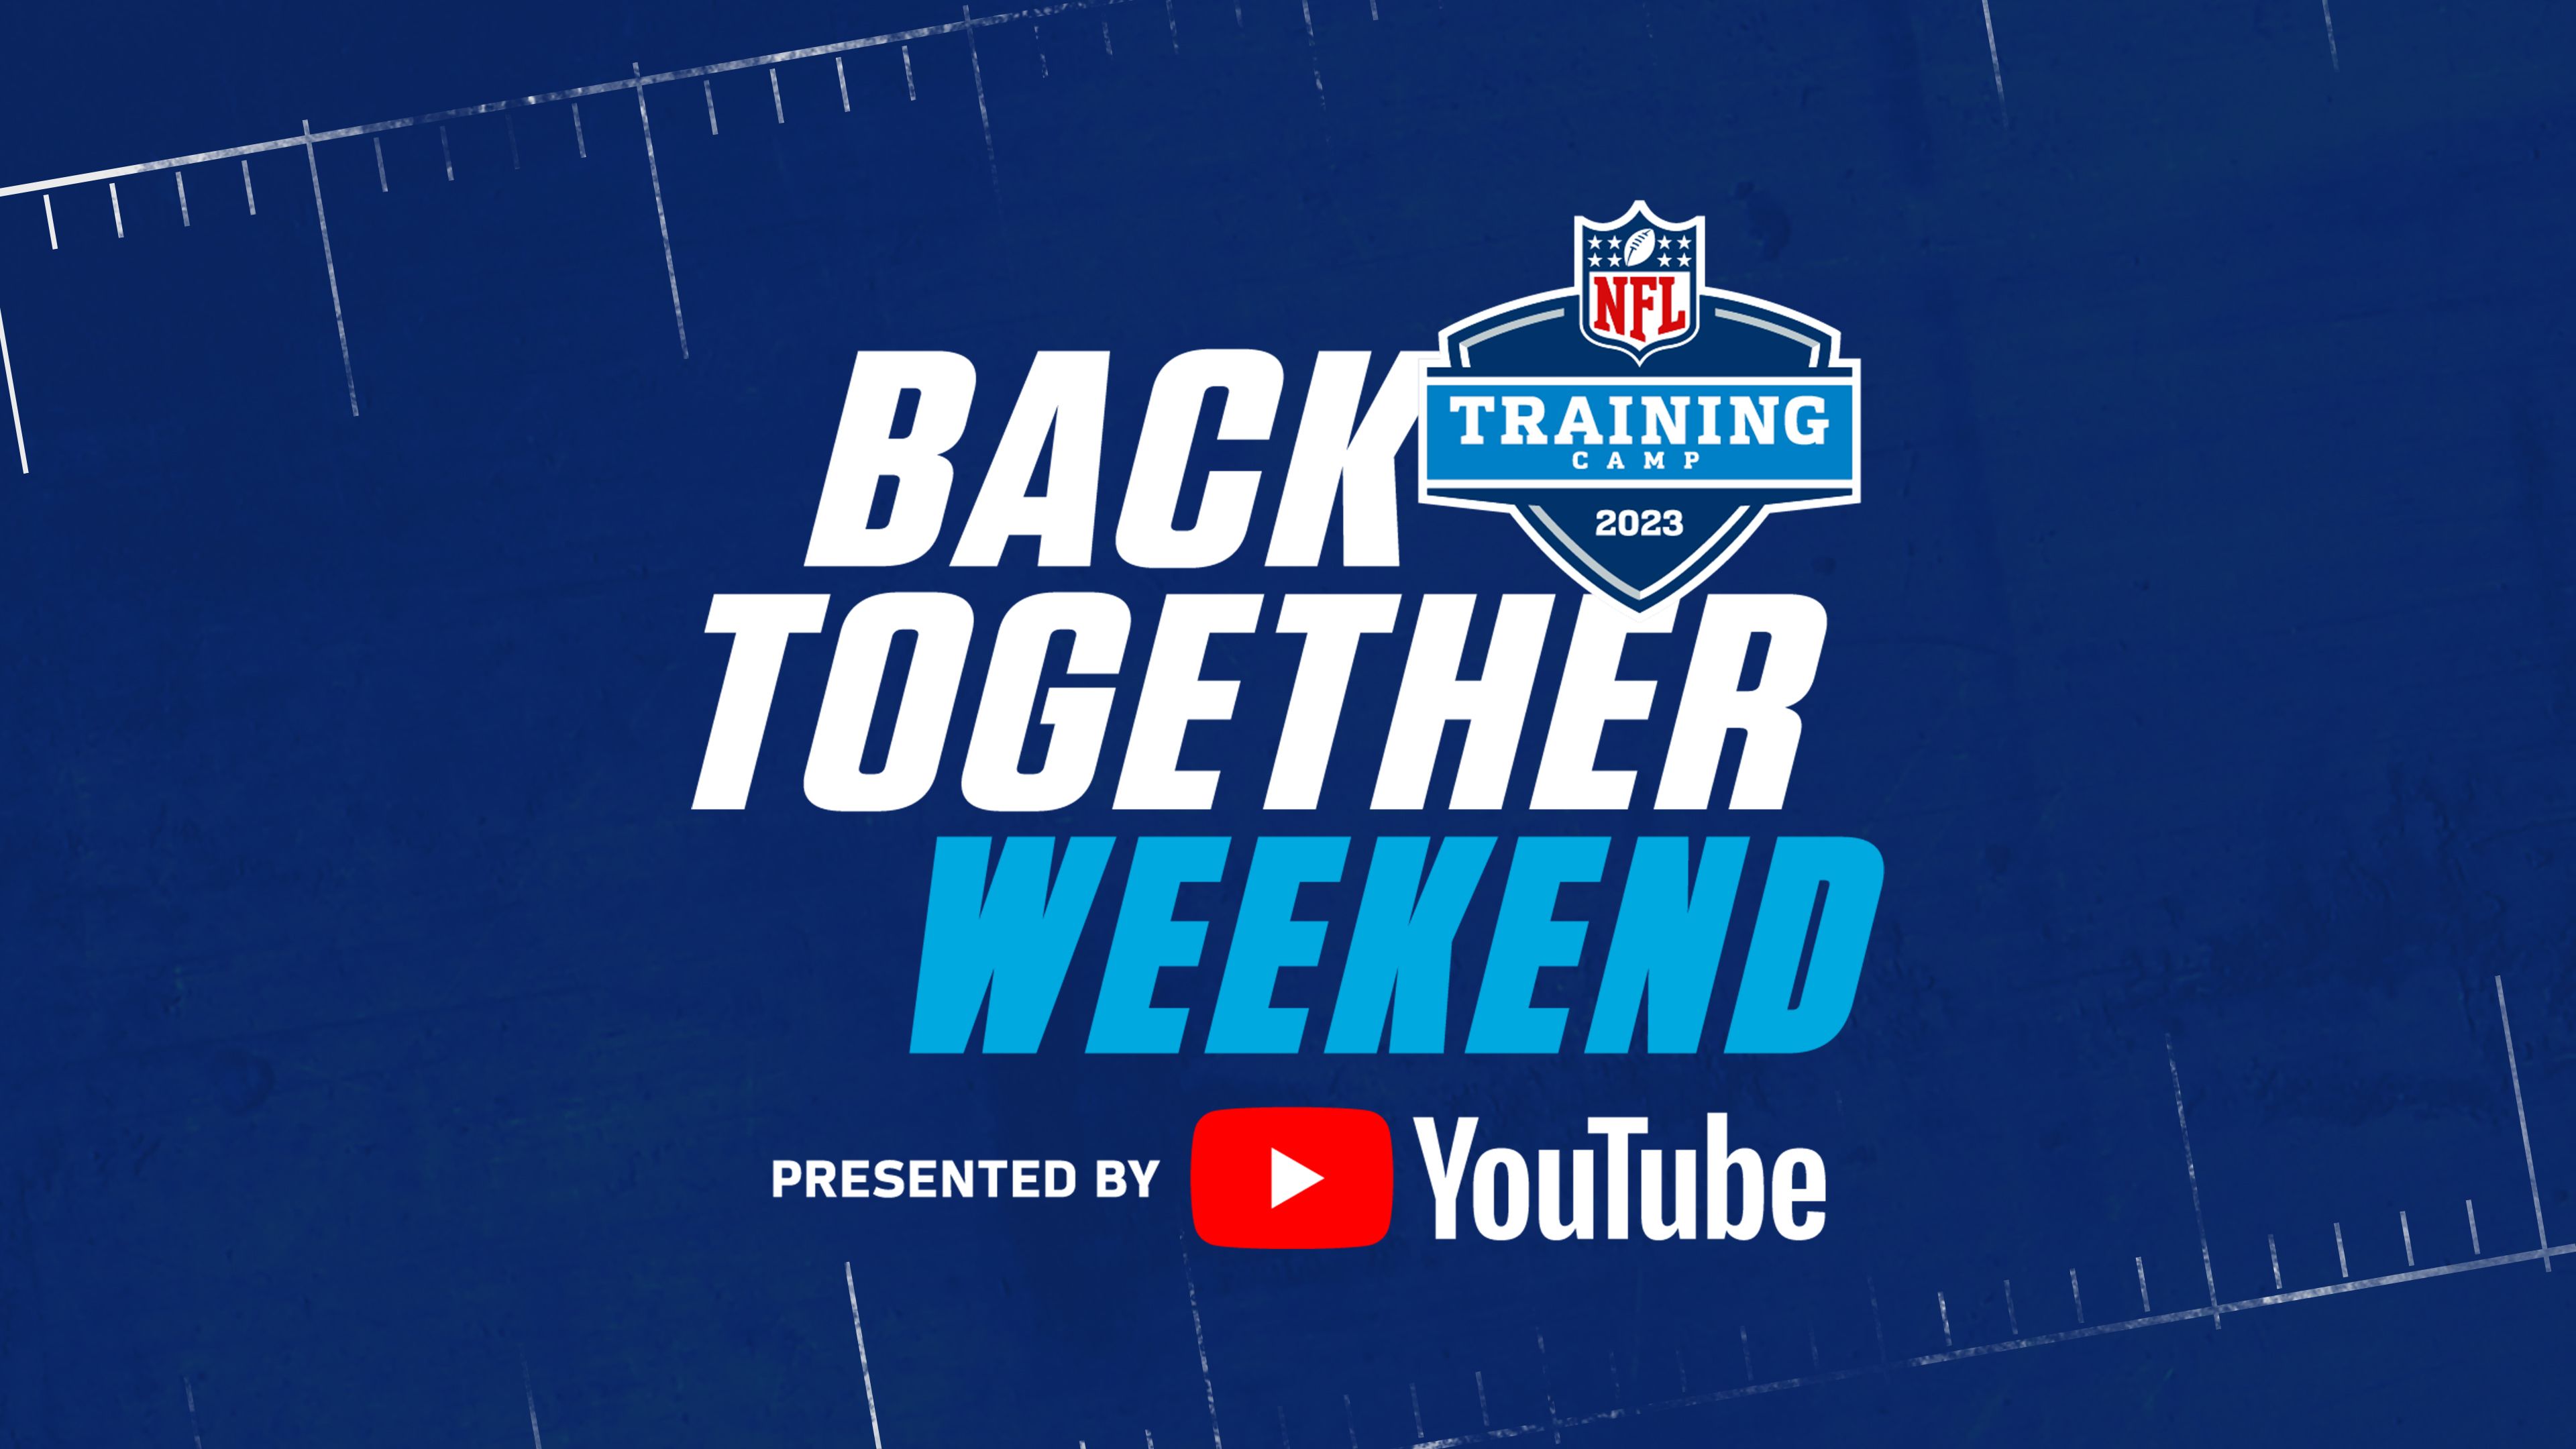 nfl network on youtube